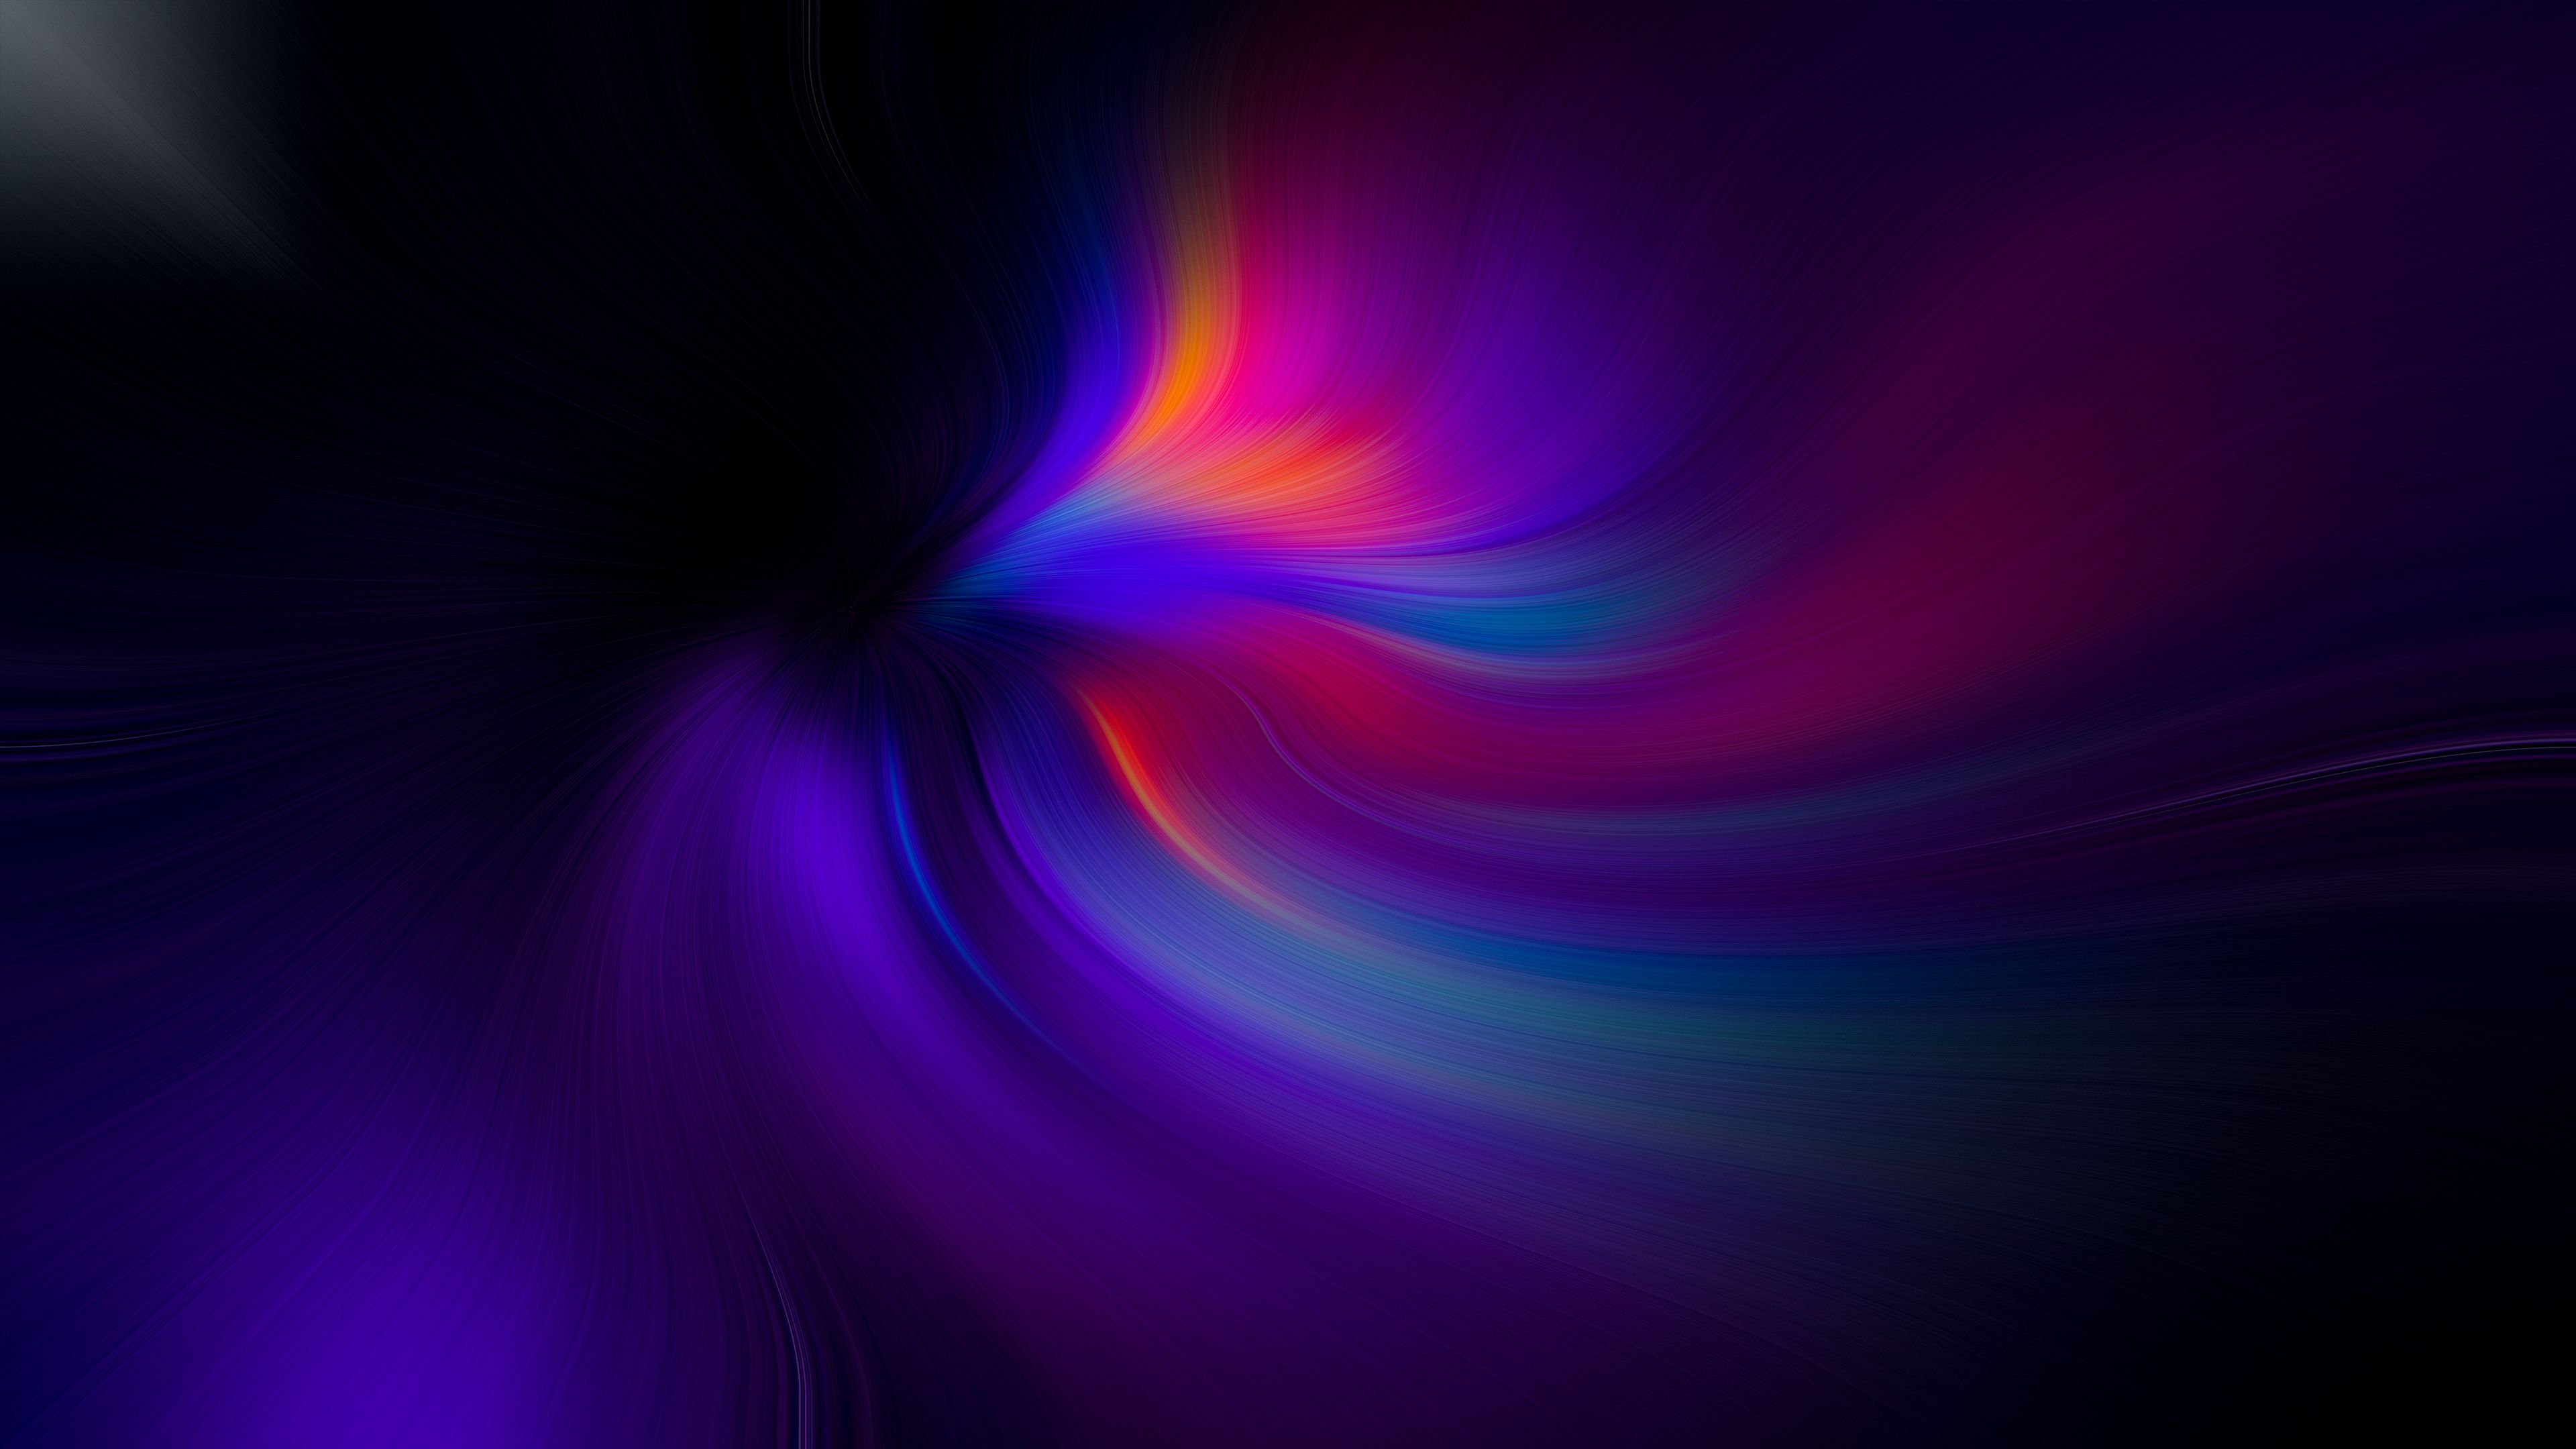 Swirl of colors abstract Wallpaper 4k Ultra HD